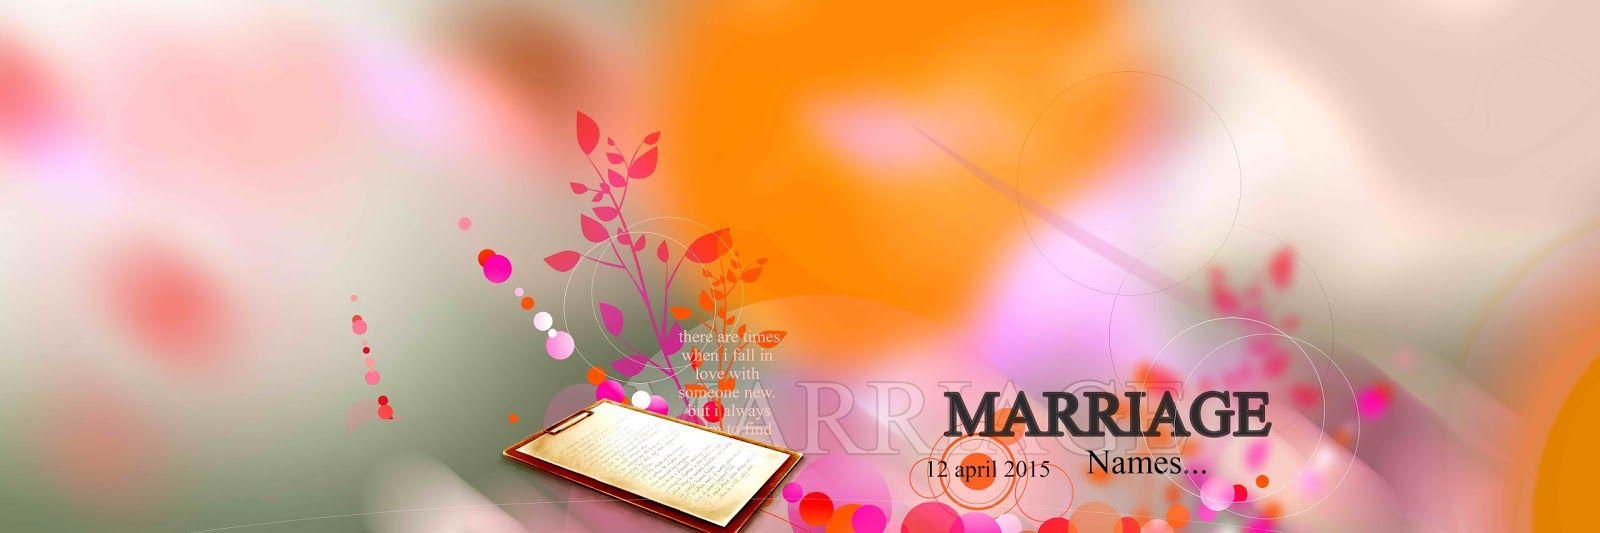 Wedding Background HD 12x36 Psd Files Free Download